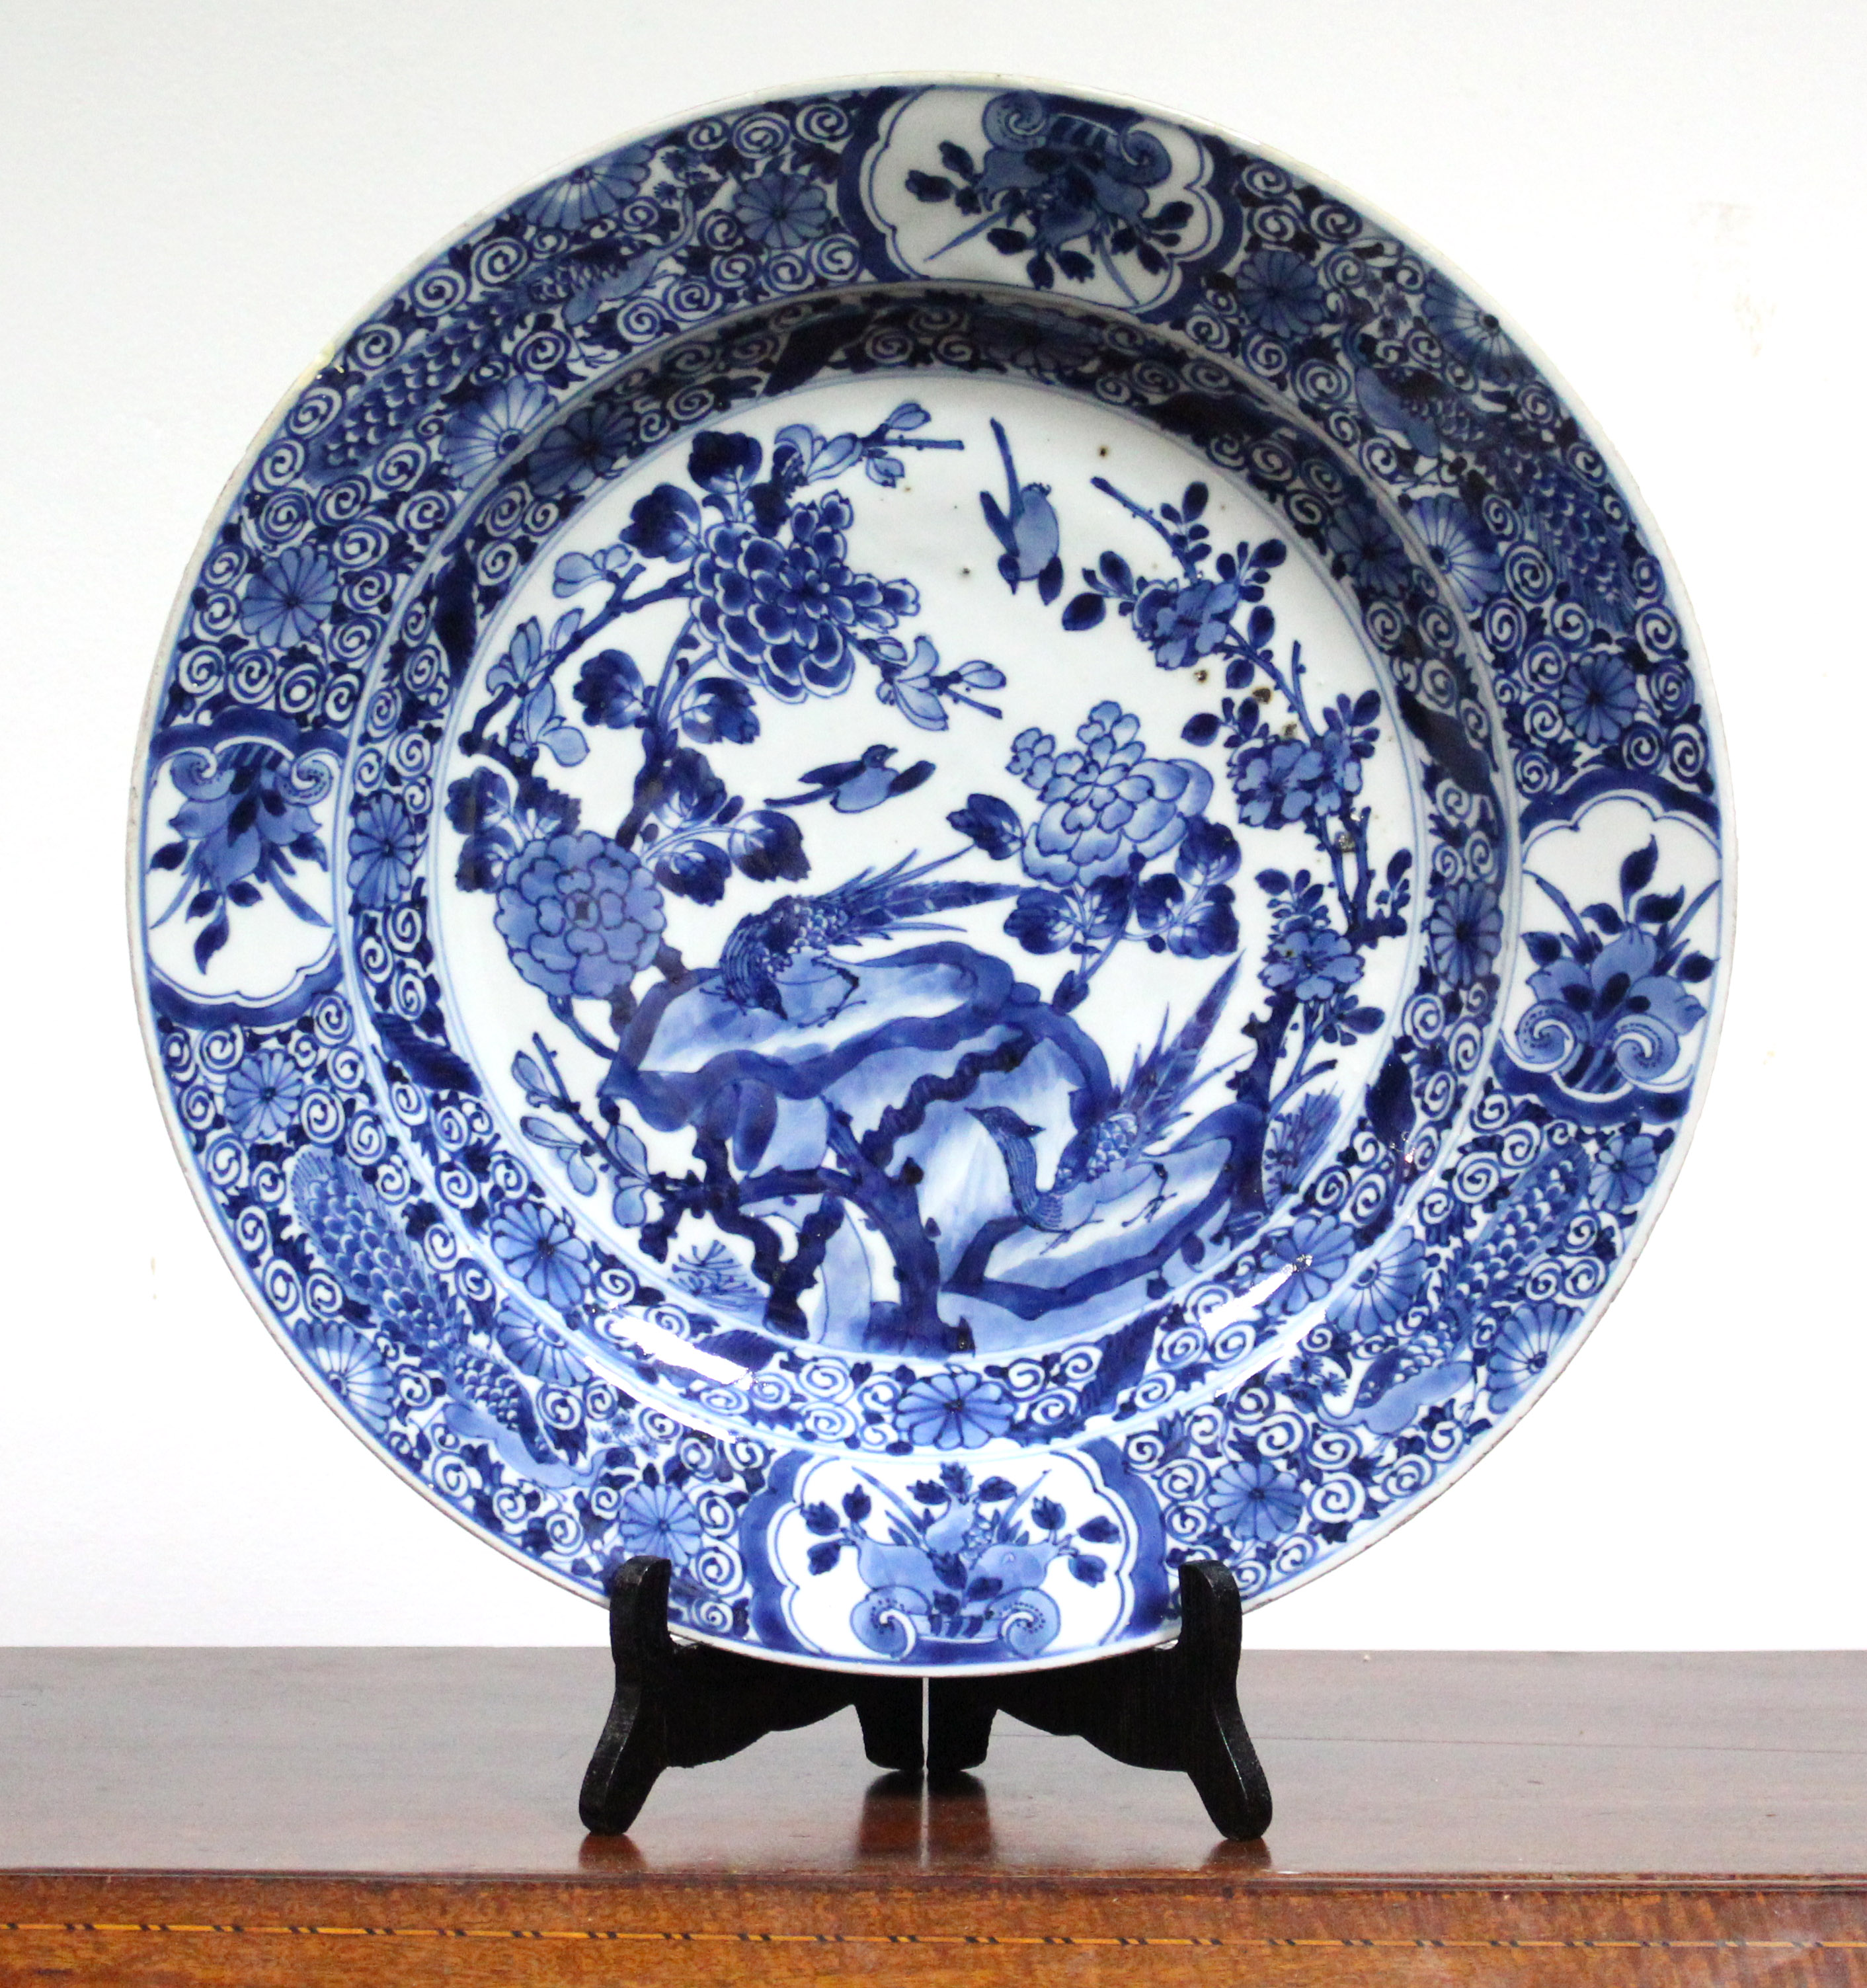 An 18th century Chinese blue & white porcelain large shallow dish painted with pheasants & songbirds